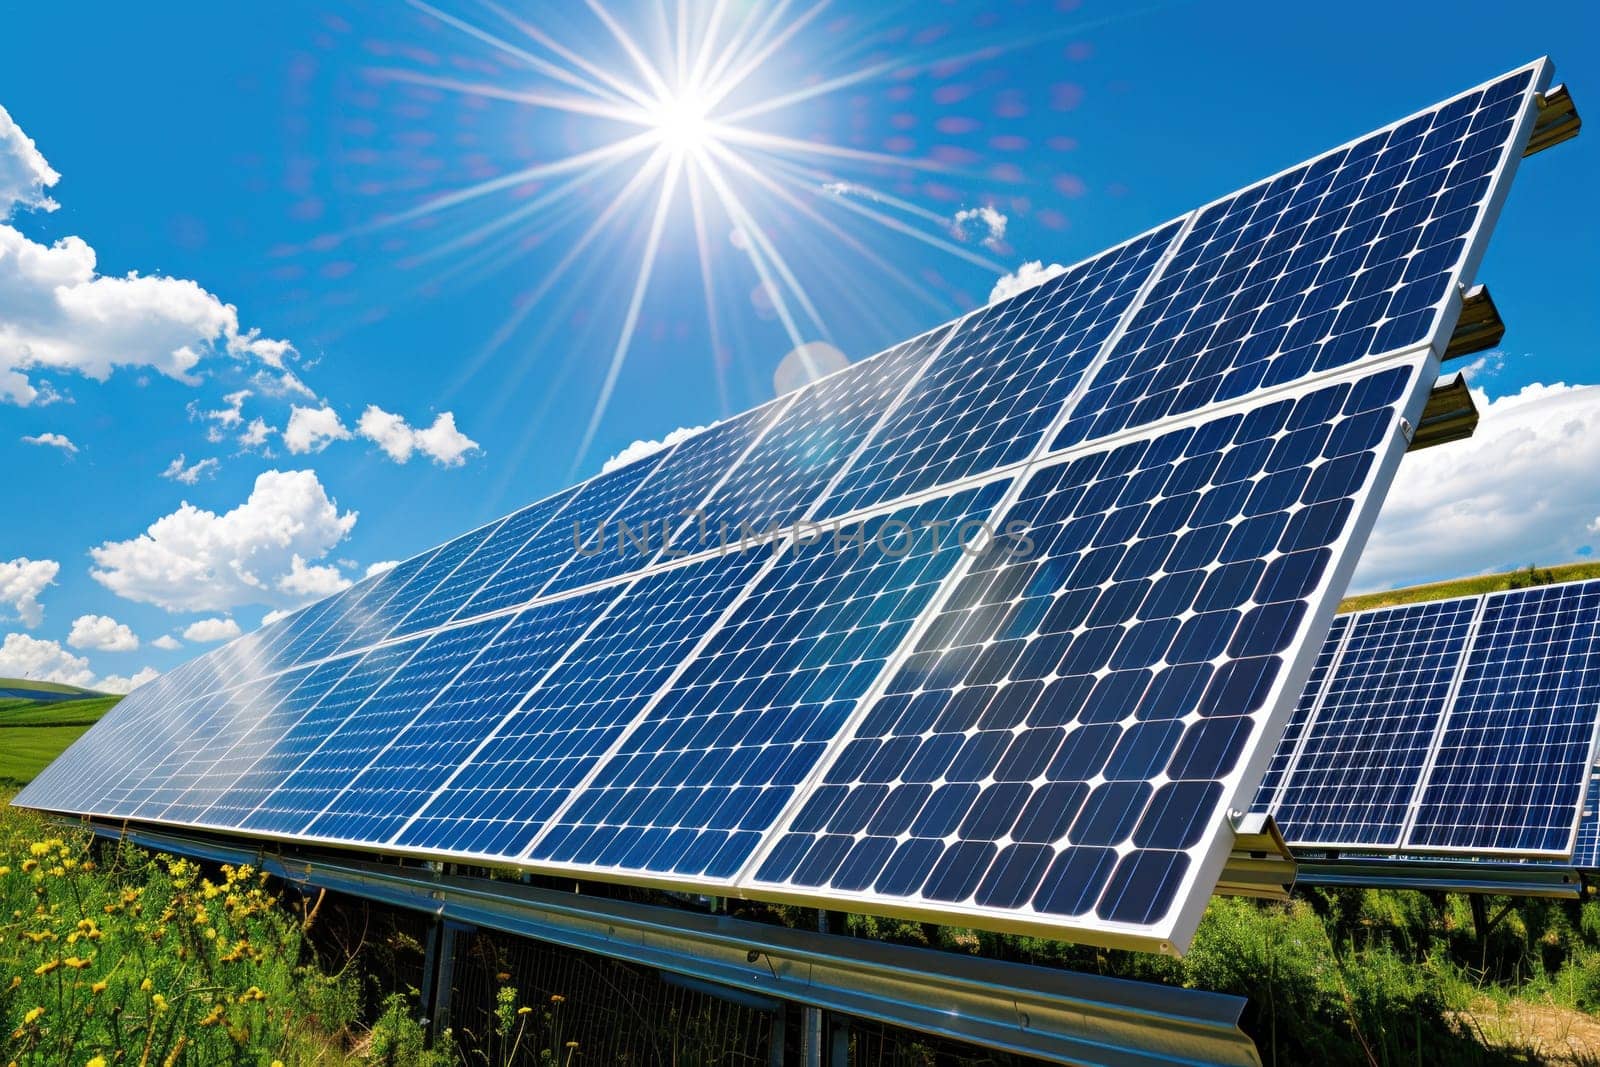 A solar panel array is shown in the sunlight, with the sun shining brightly on the panels. The panels are arranged in a way that they are angled towards the sun